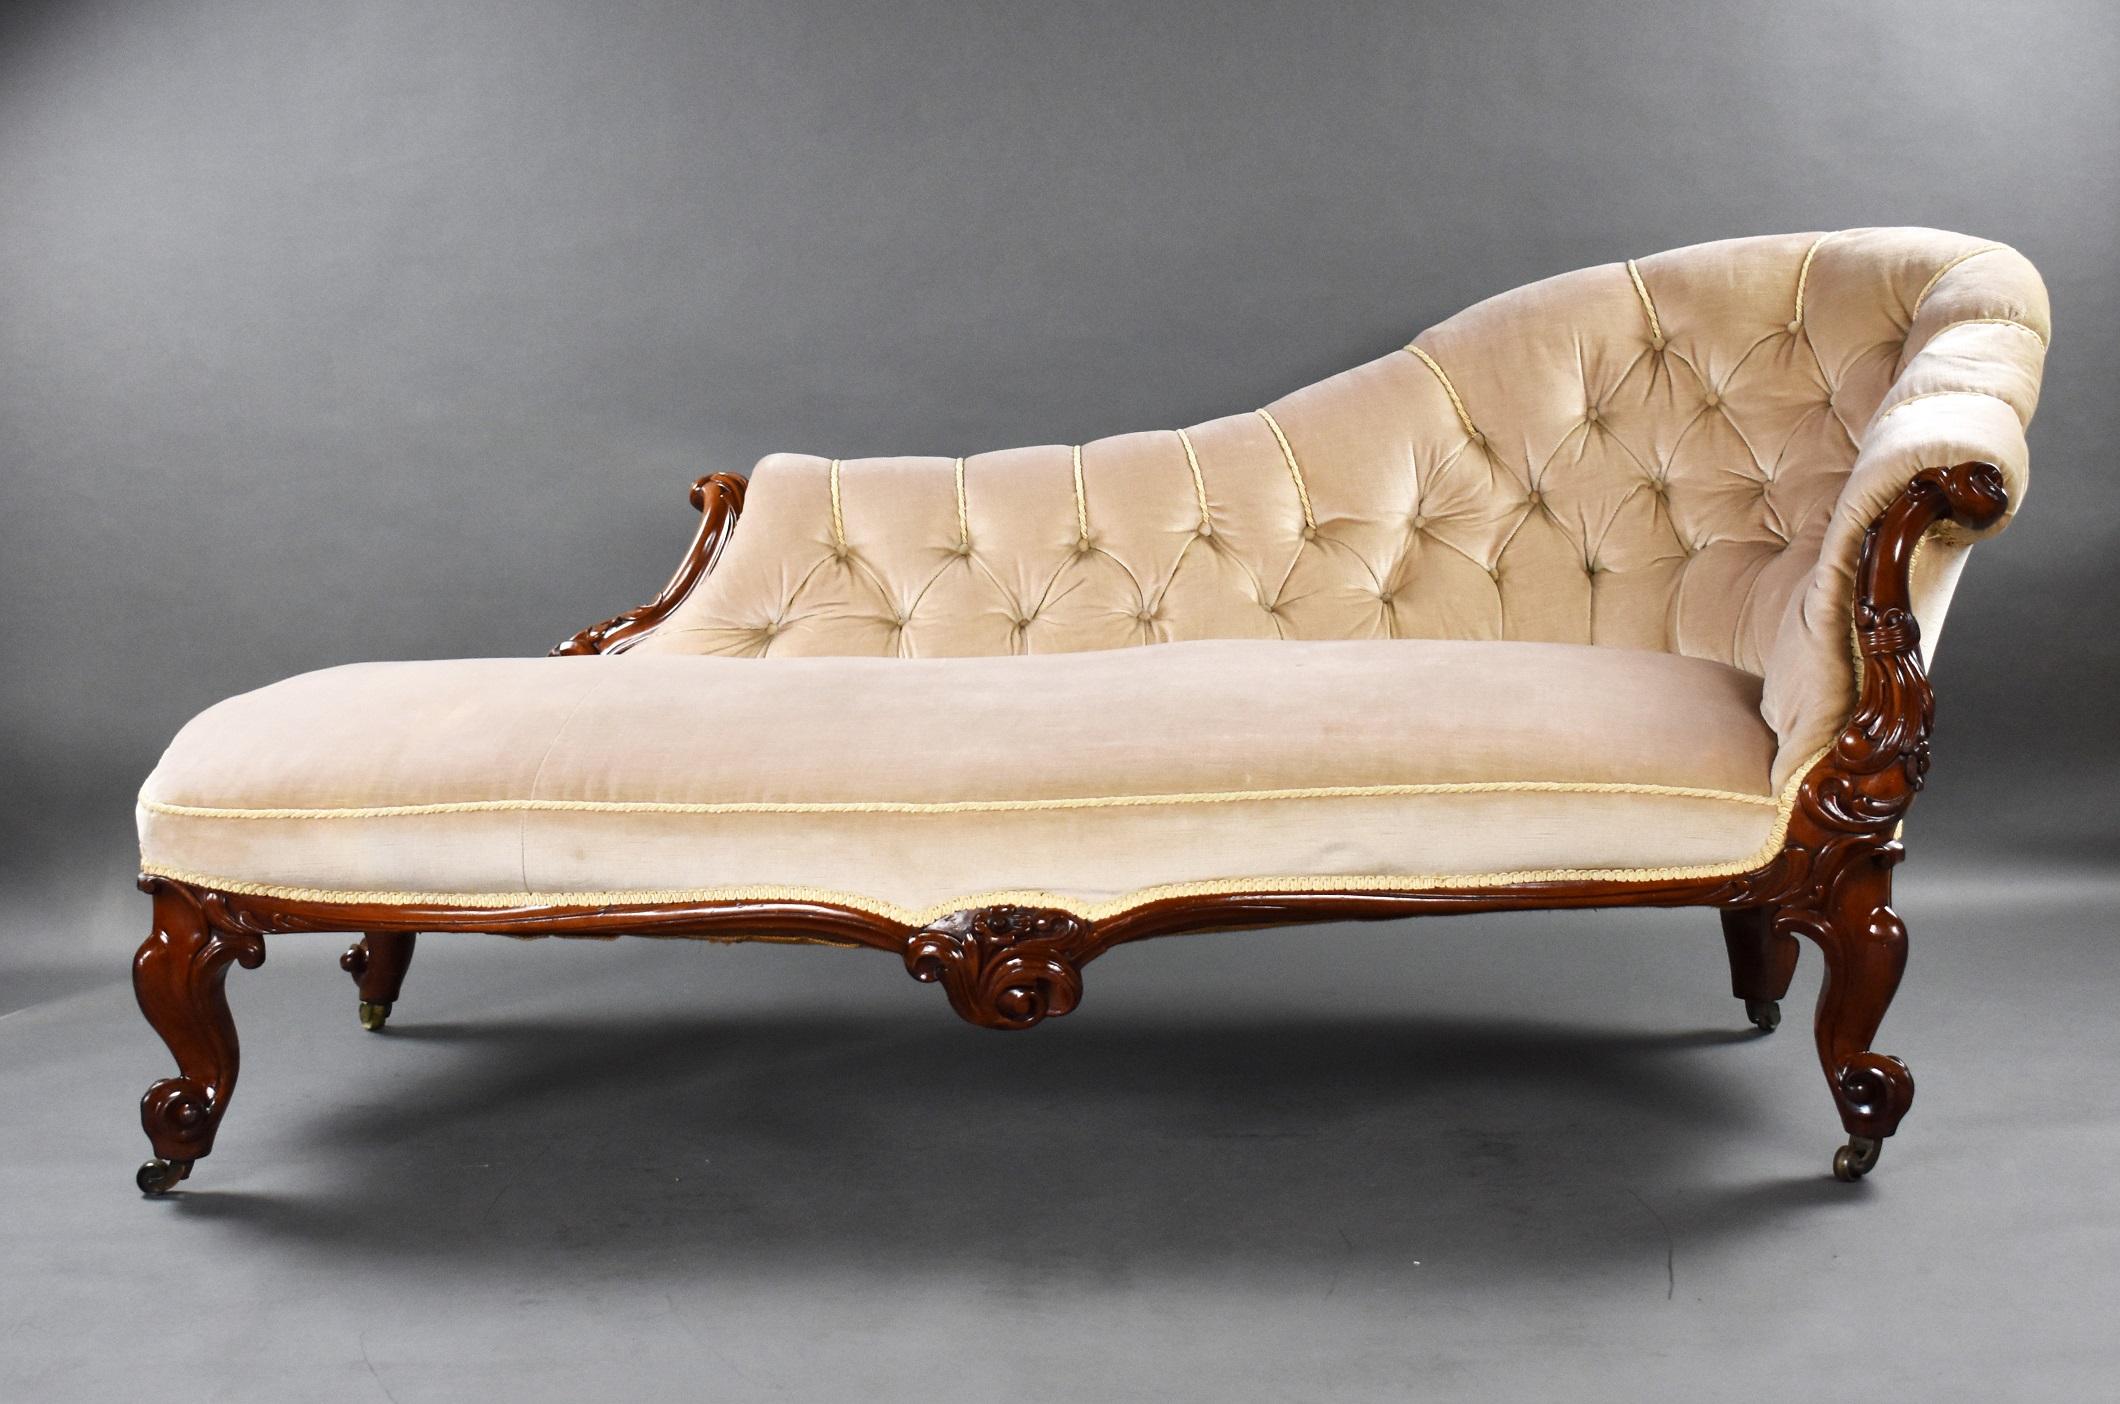 Victorian mahogany chaise lounge upholstered in a buttoned velour, the chaise, the arms and cabriole legs are finely carved with scrolls, raised on brass castors.